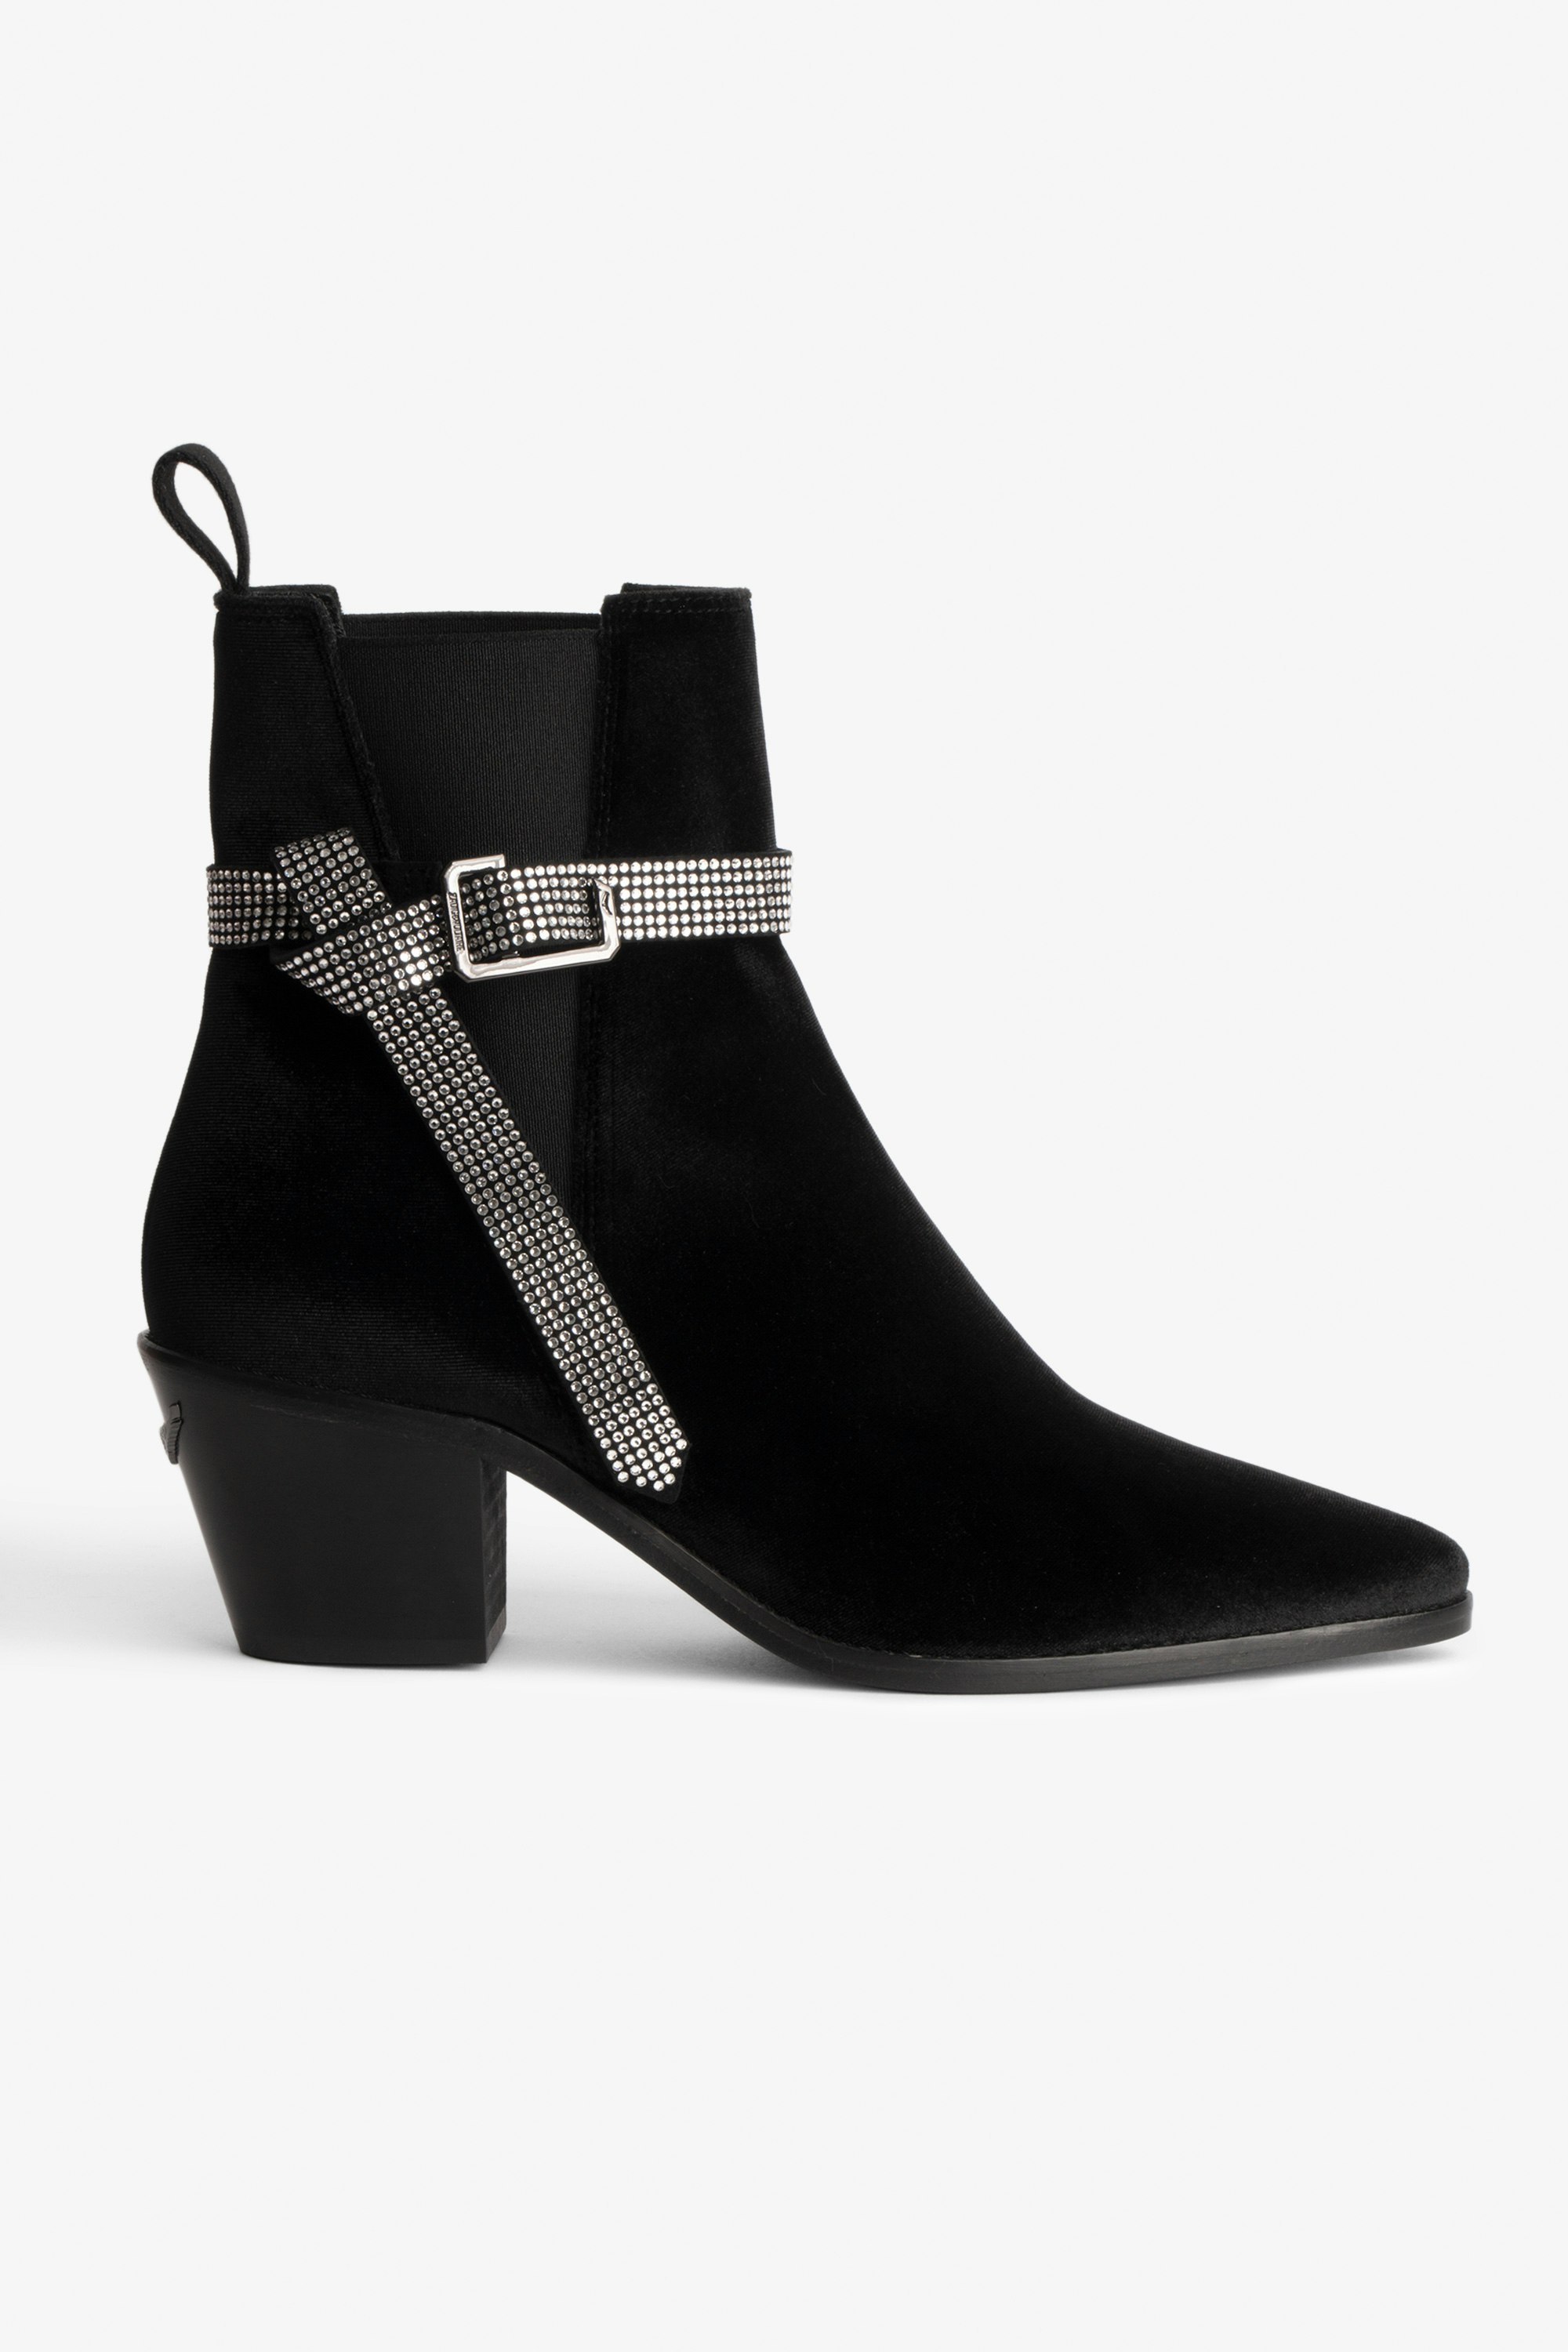 Tyler Ankle Boots - Women’s black suede ankle boots with Swarovski® rhinestones.